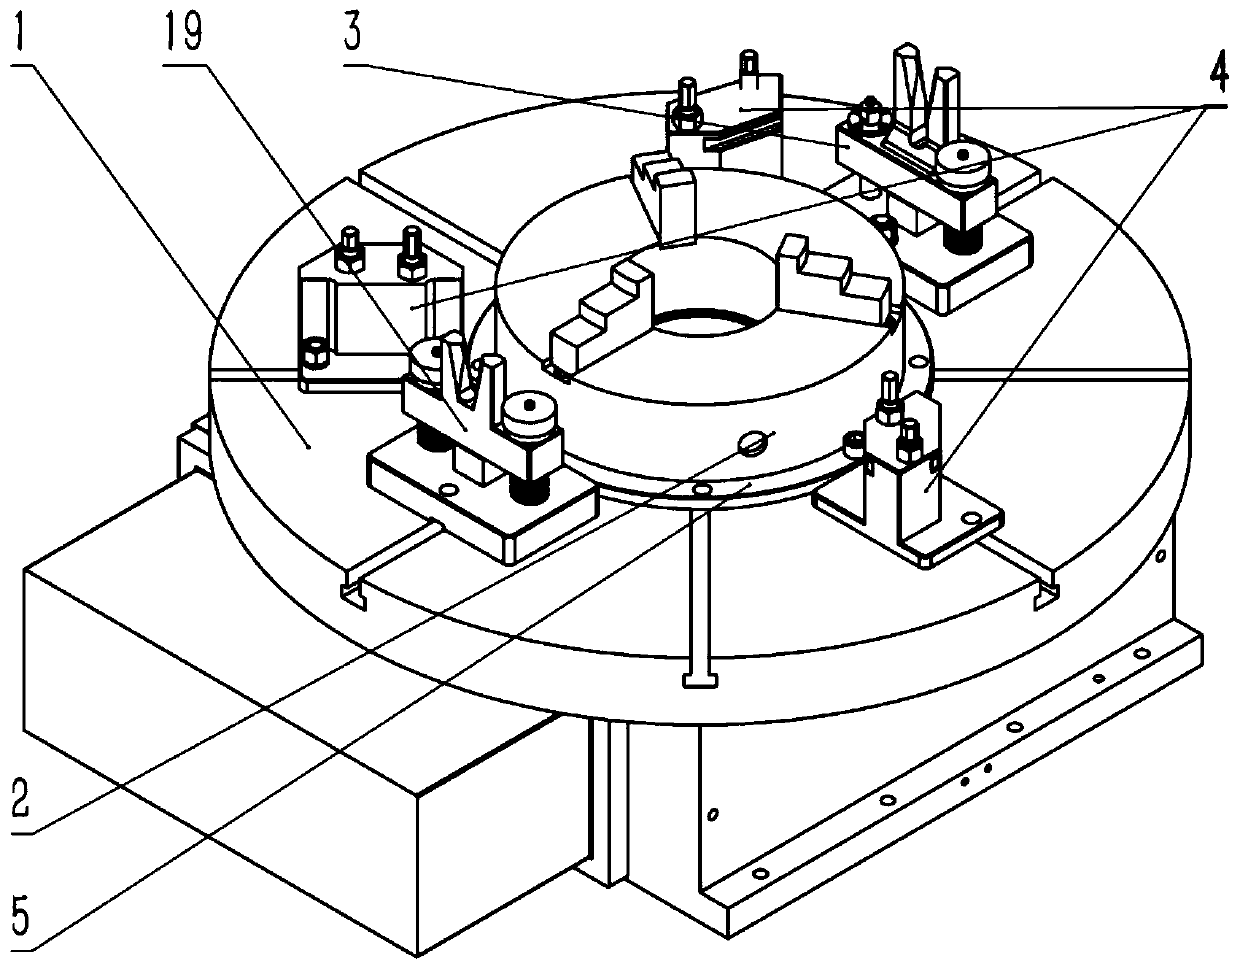 A positioning fixture and clamping method for titanium alloy ring castings